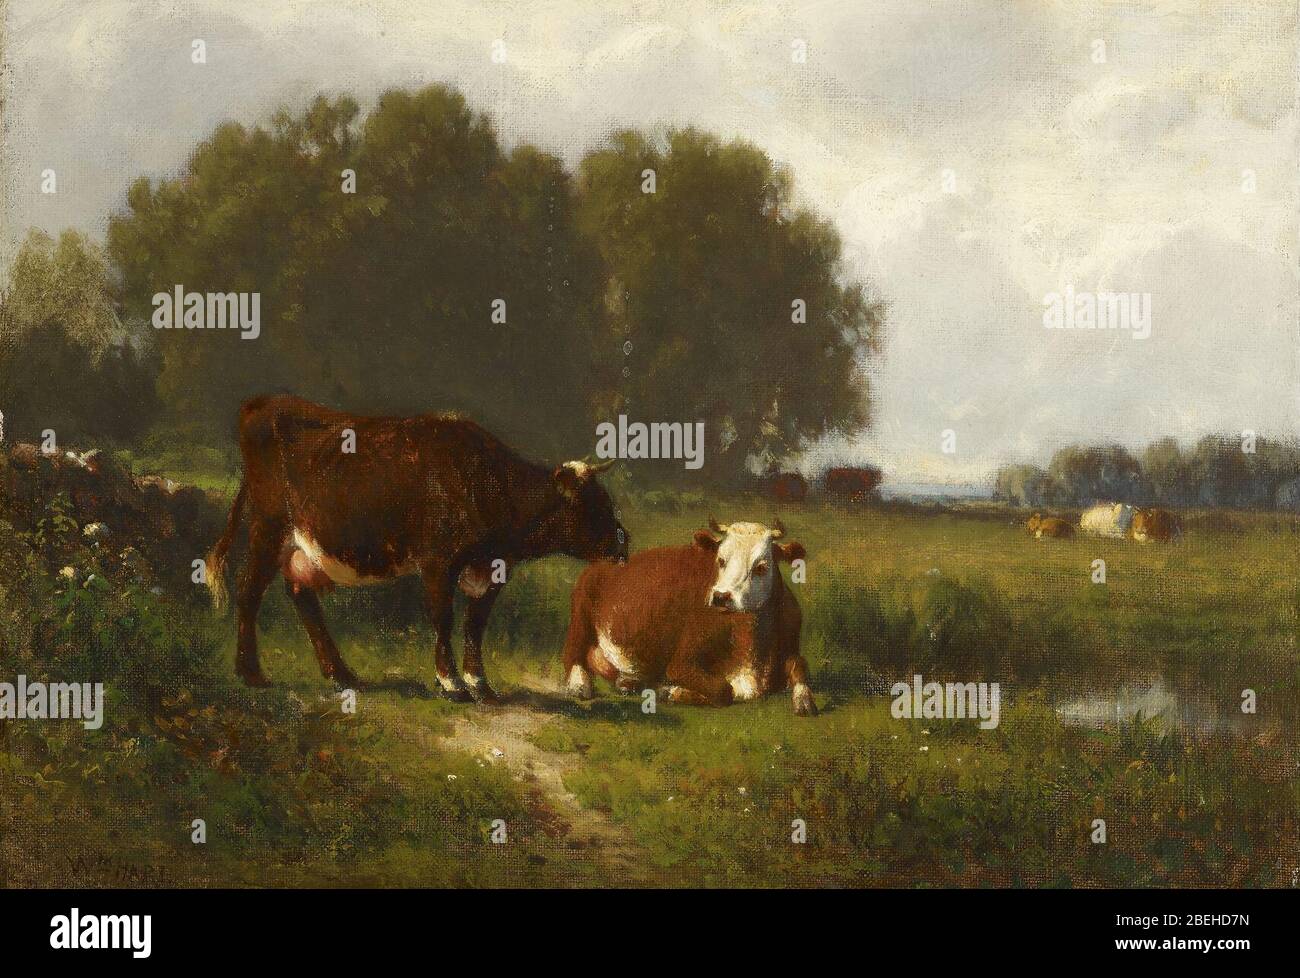 William M Hart - Landscape with Cows Stock Photo